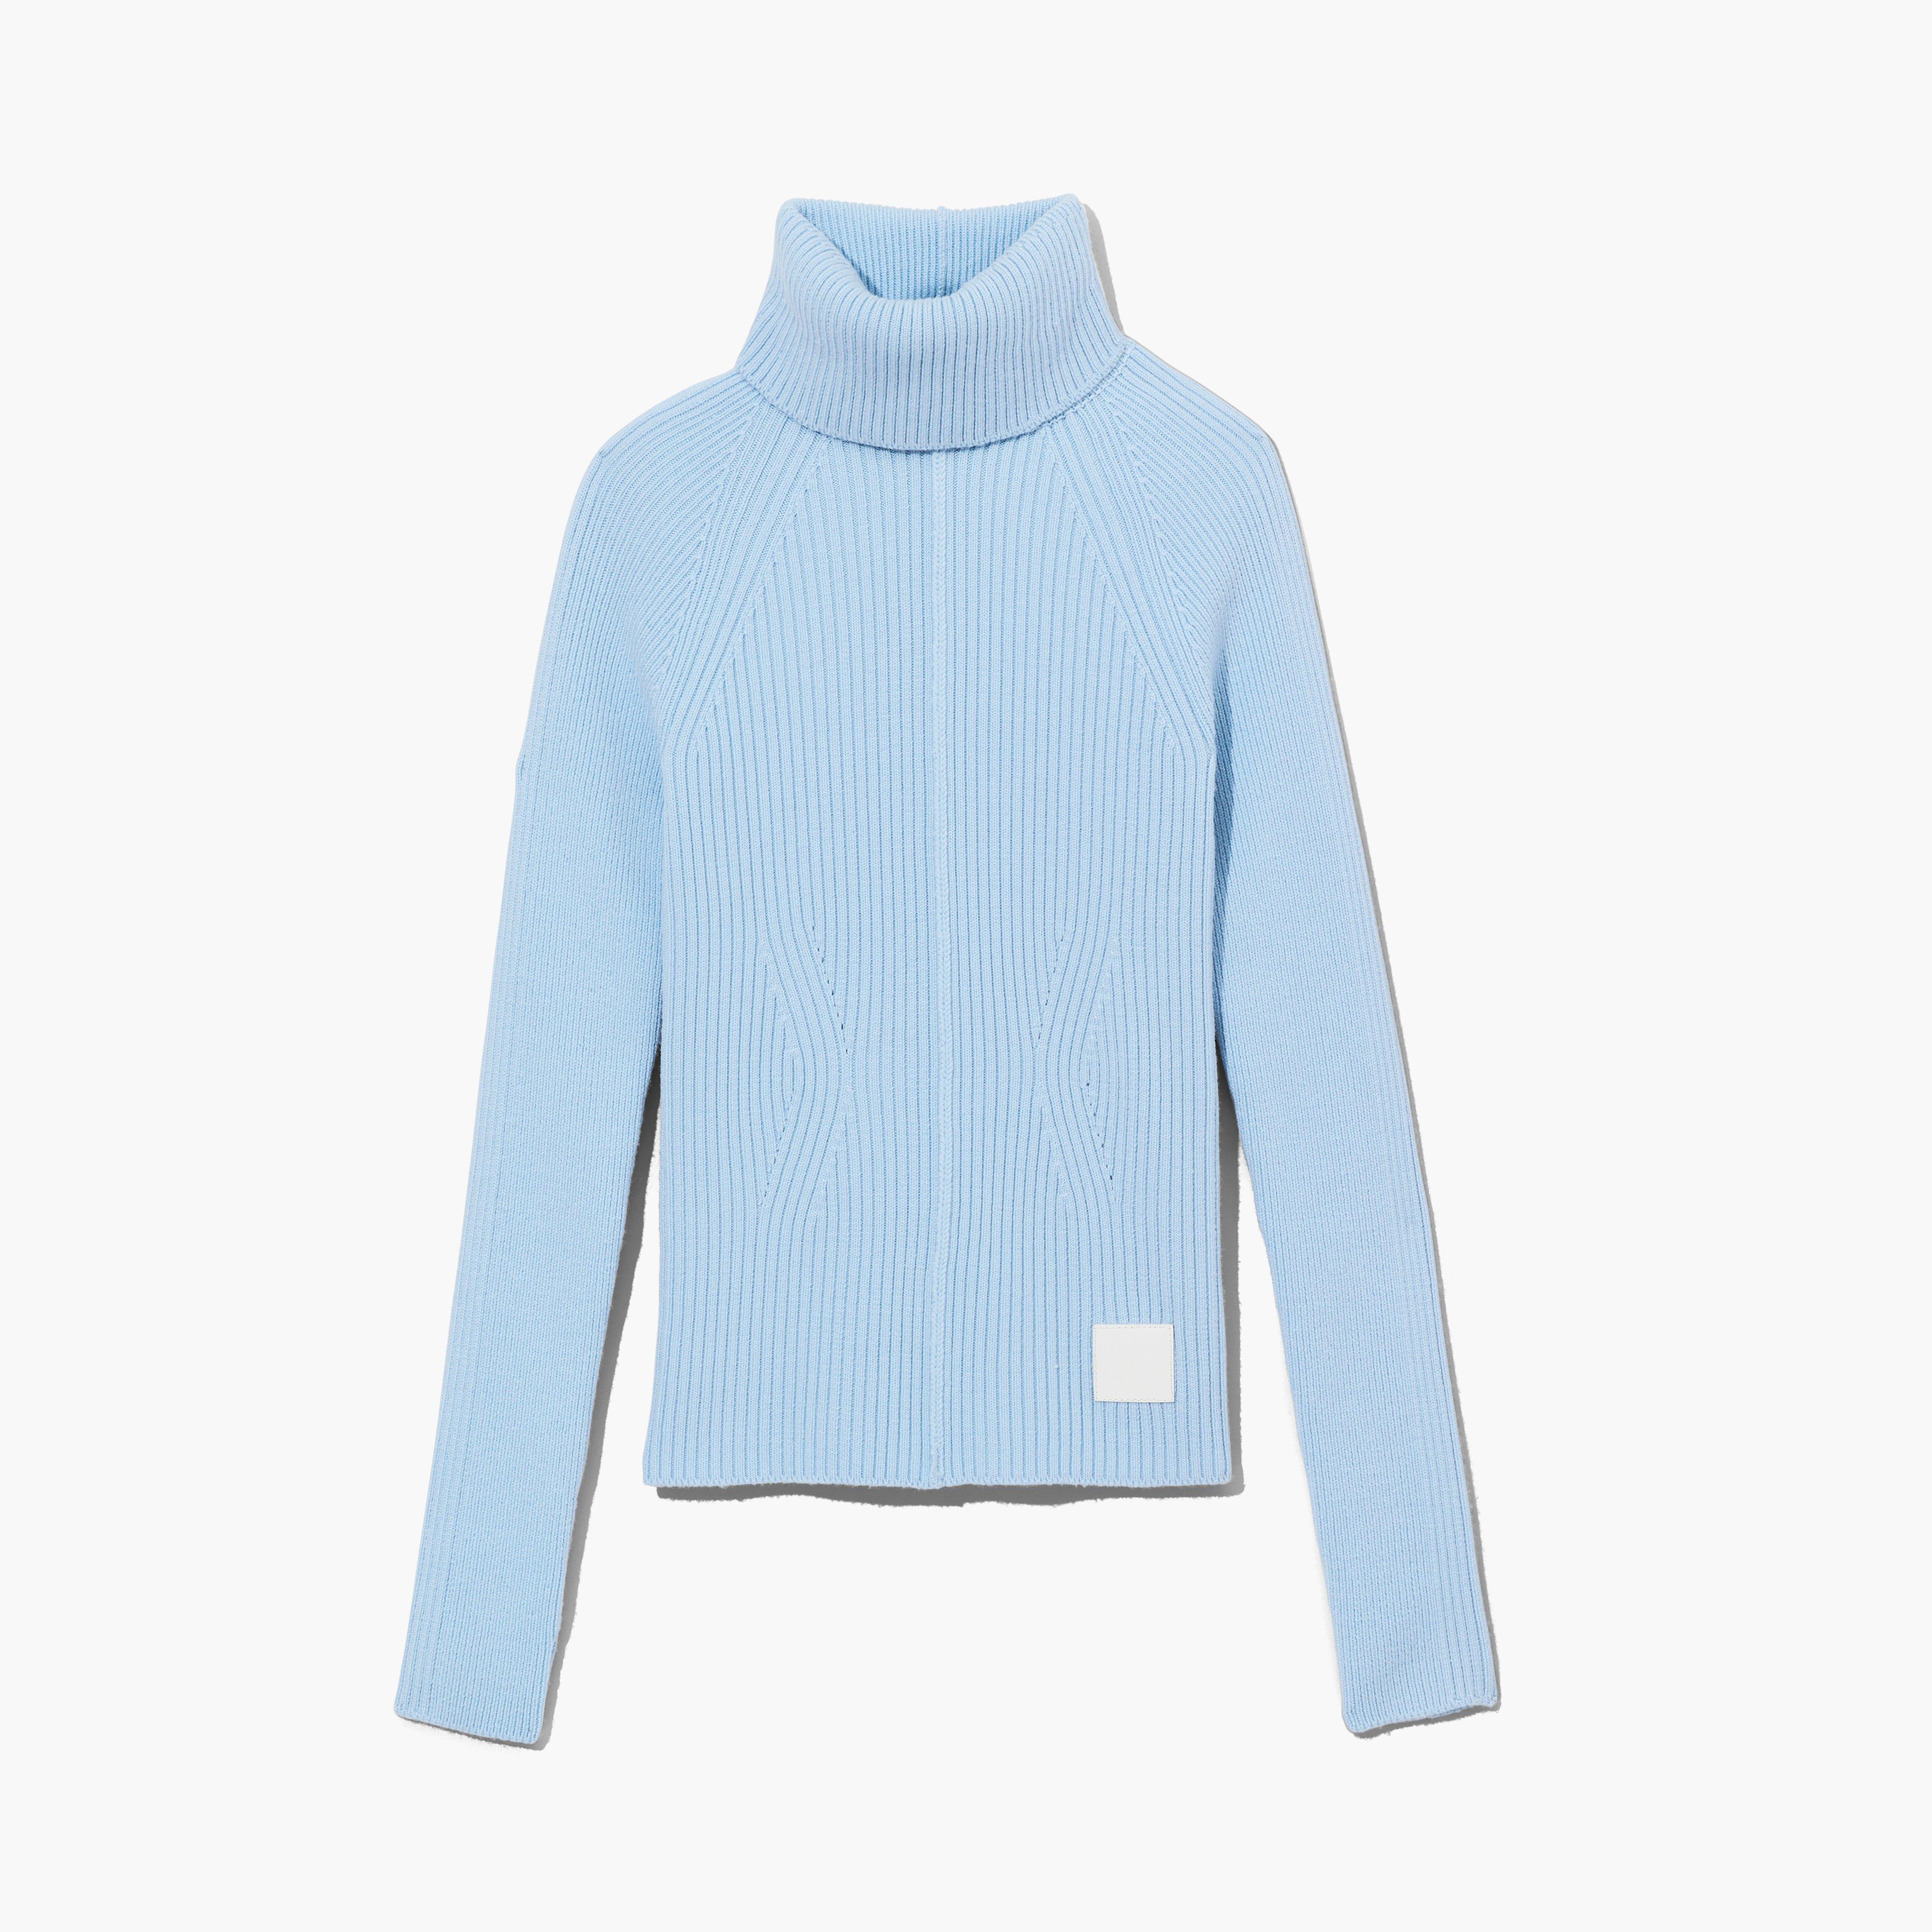 Marc by Marc jacobs The Ribbed Turtleneck,BLUE